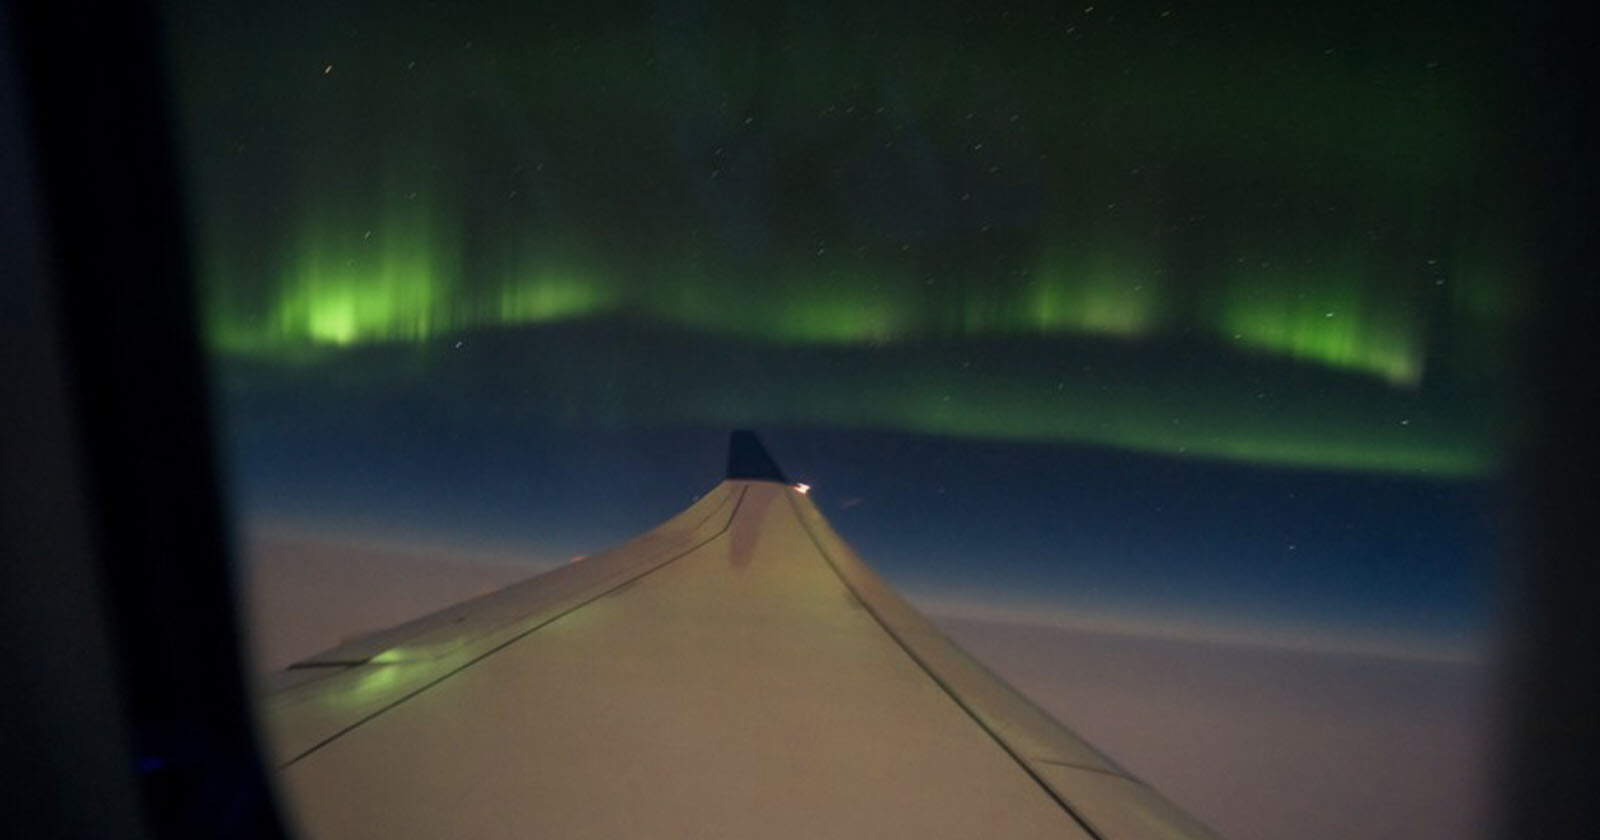 Olympic Athlete Captures Impressive Photo of Northern Lights from Airplane